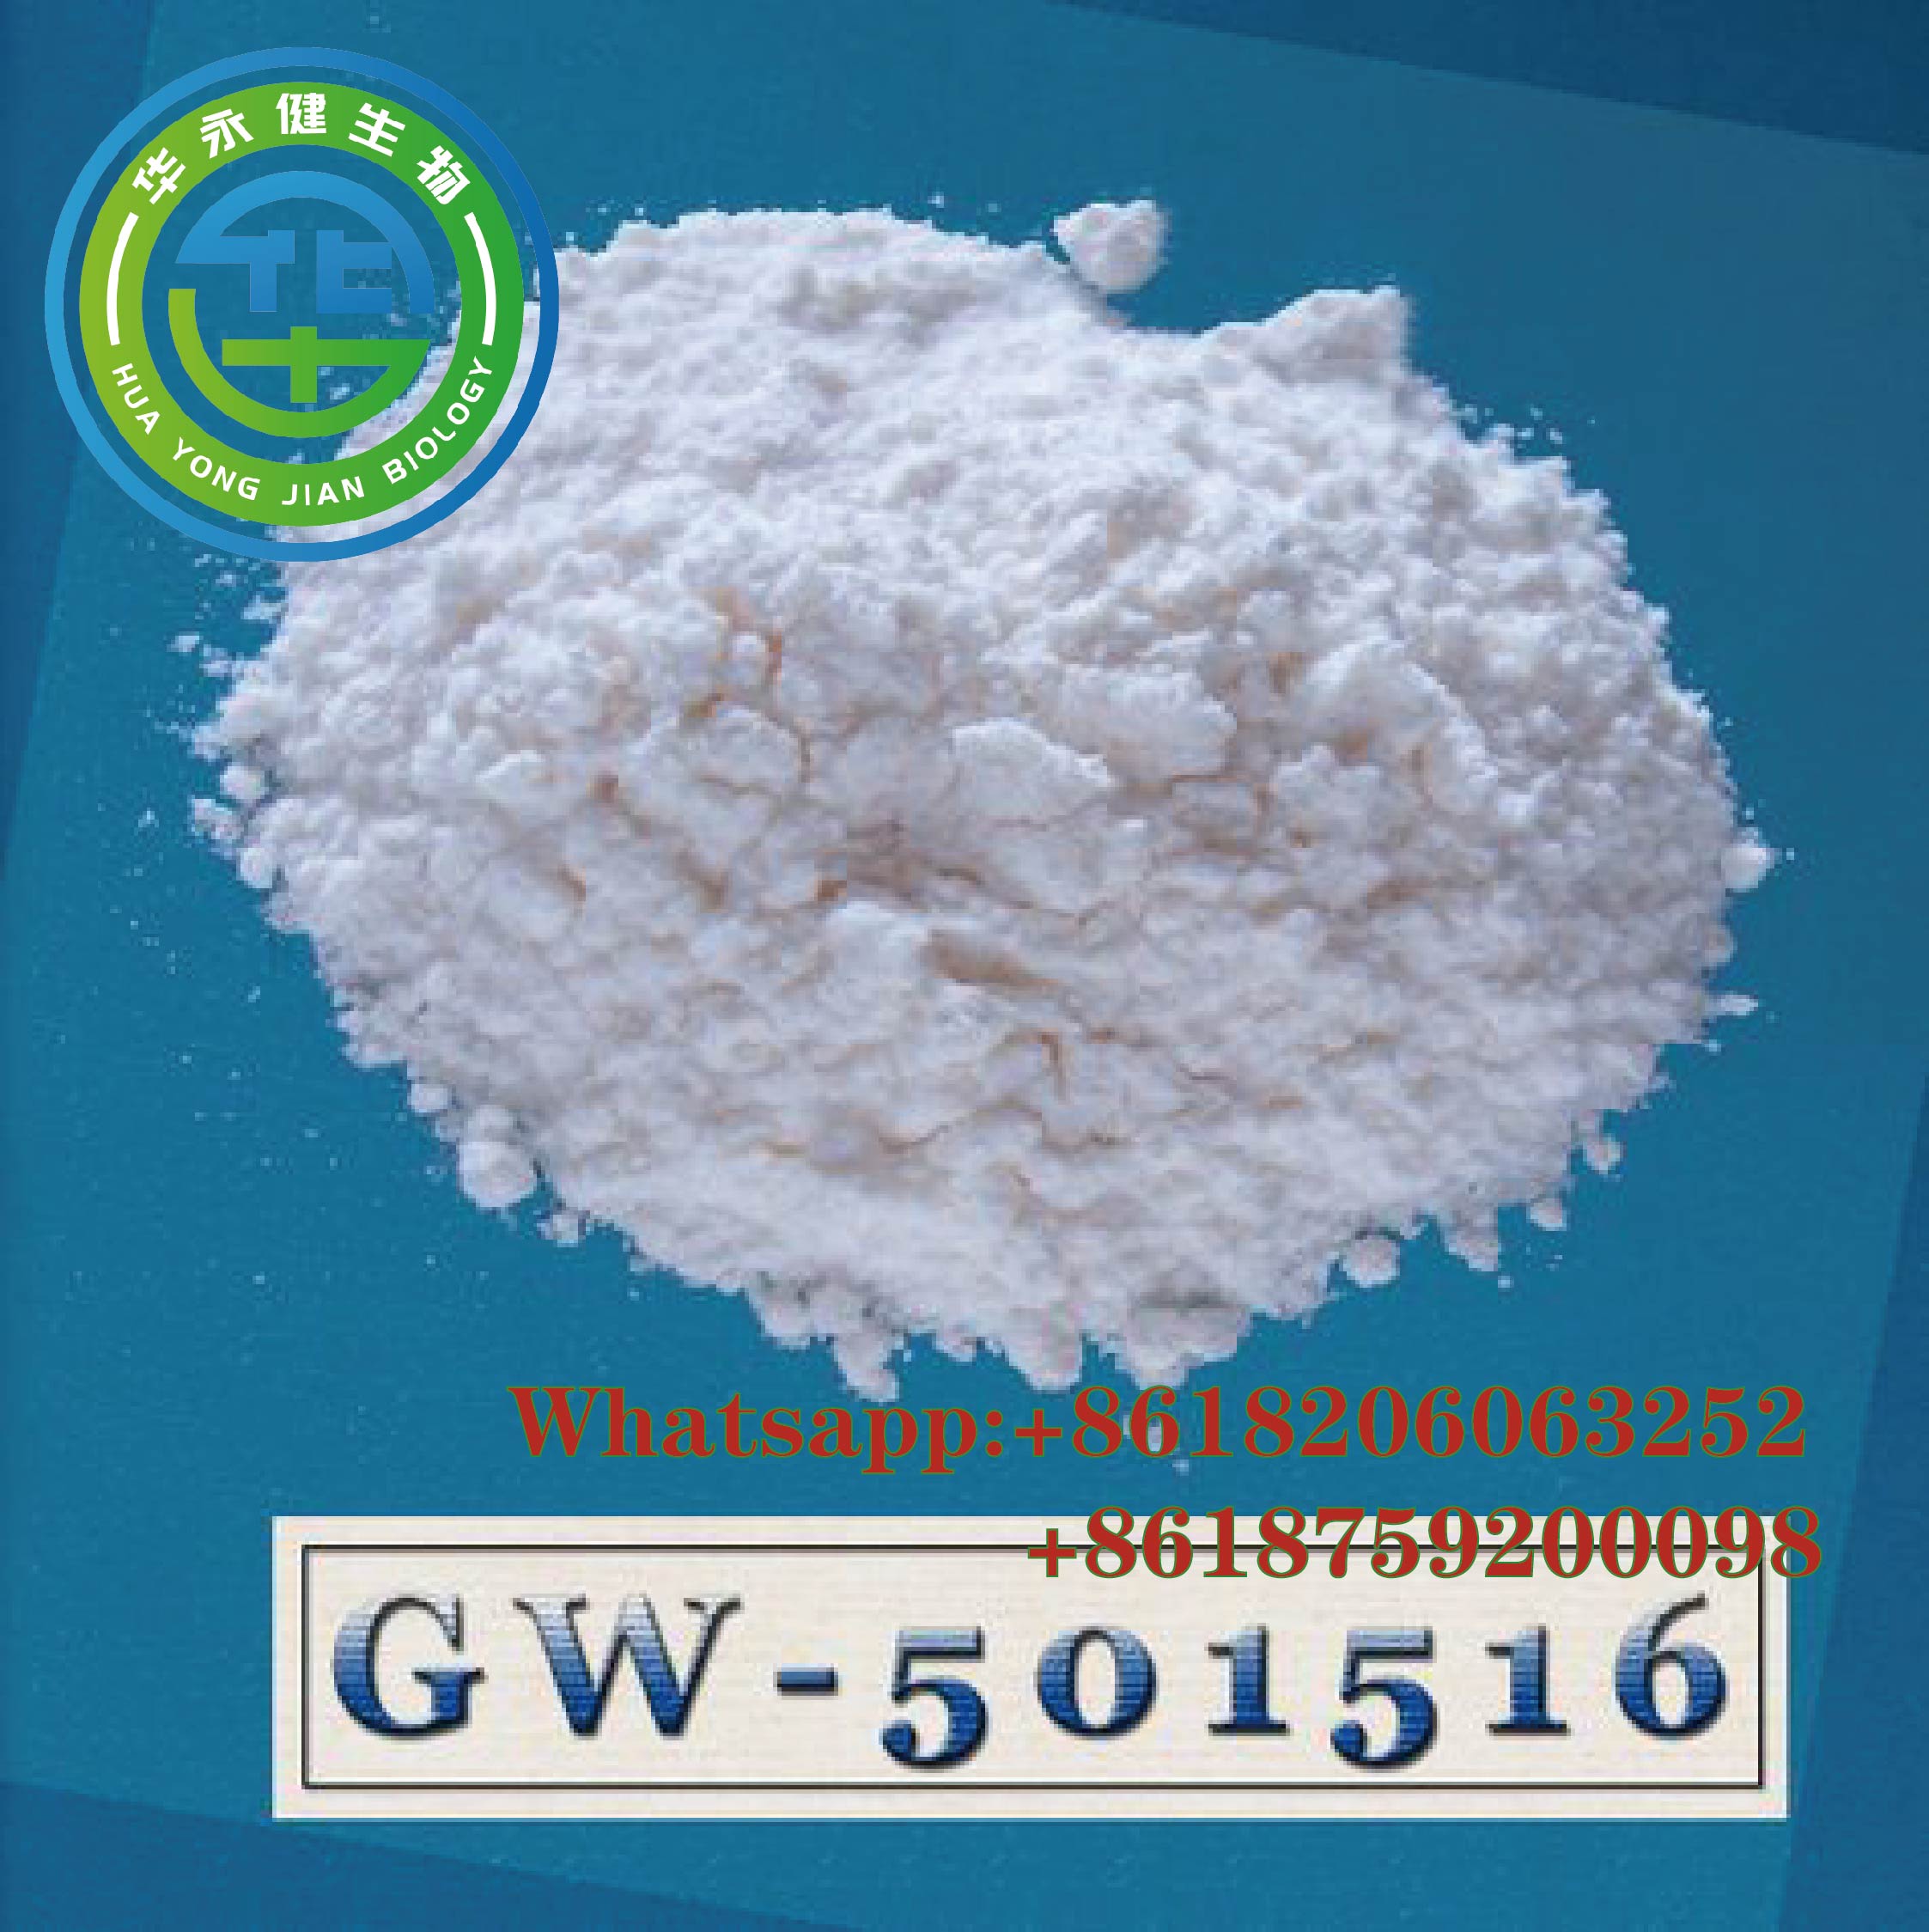 Discover the Health Benefits of SR9009 Raw Powder